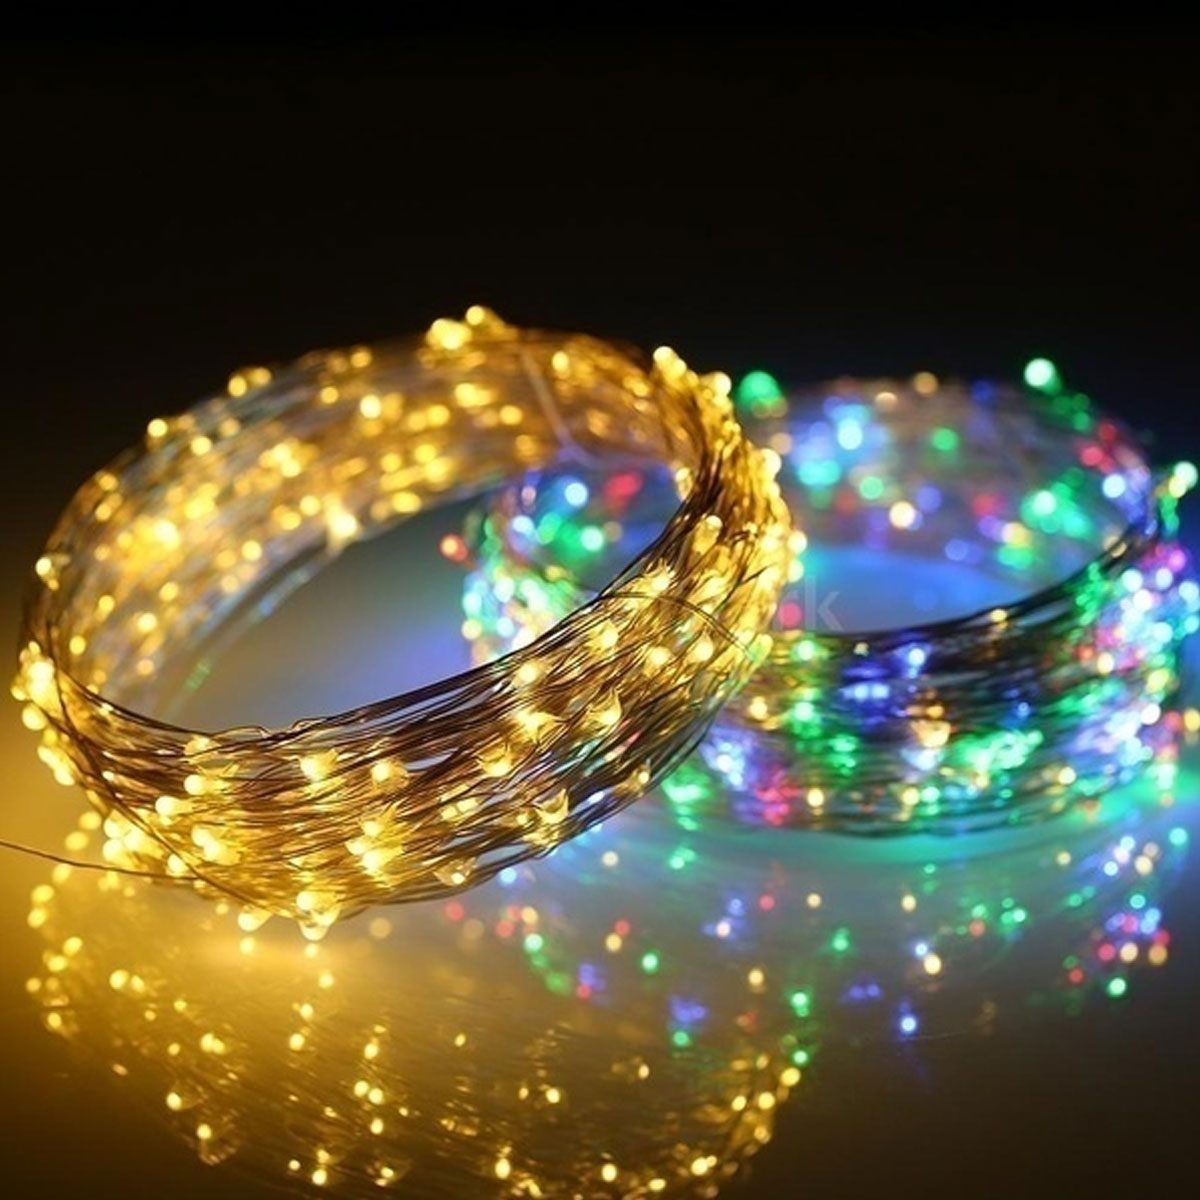 300400-LED-Waterproof-Colorful-Light-Fairy-String-Rope-Solar-Lights-Outdoor-1729916-7